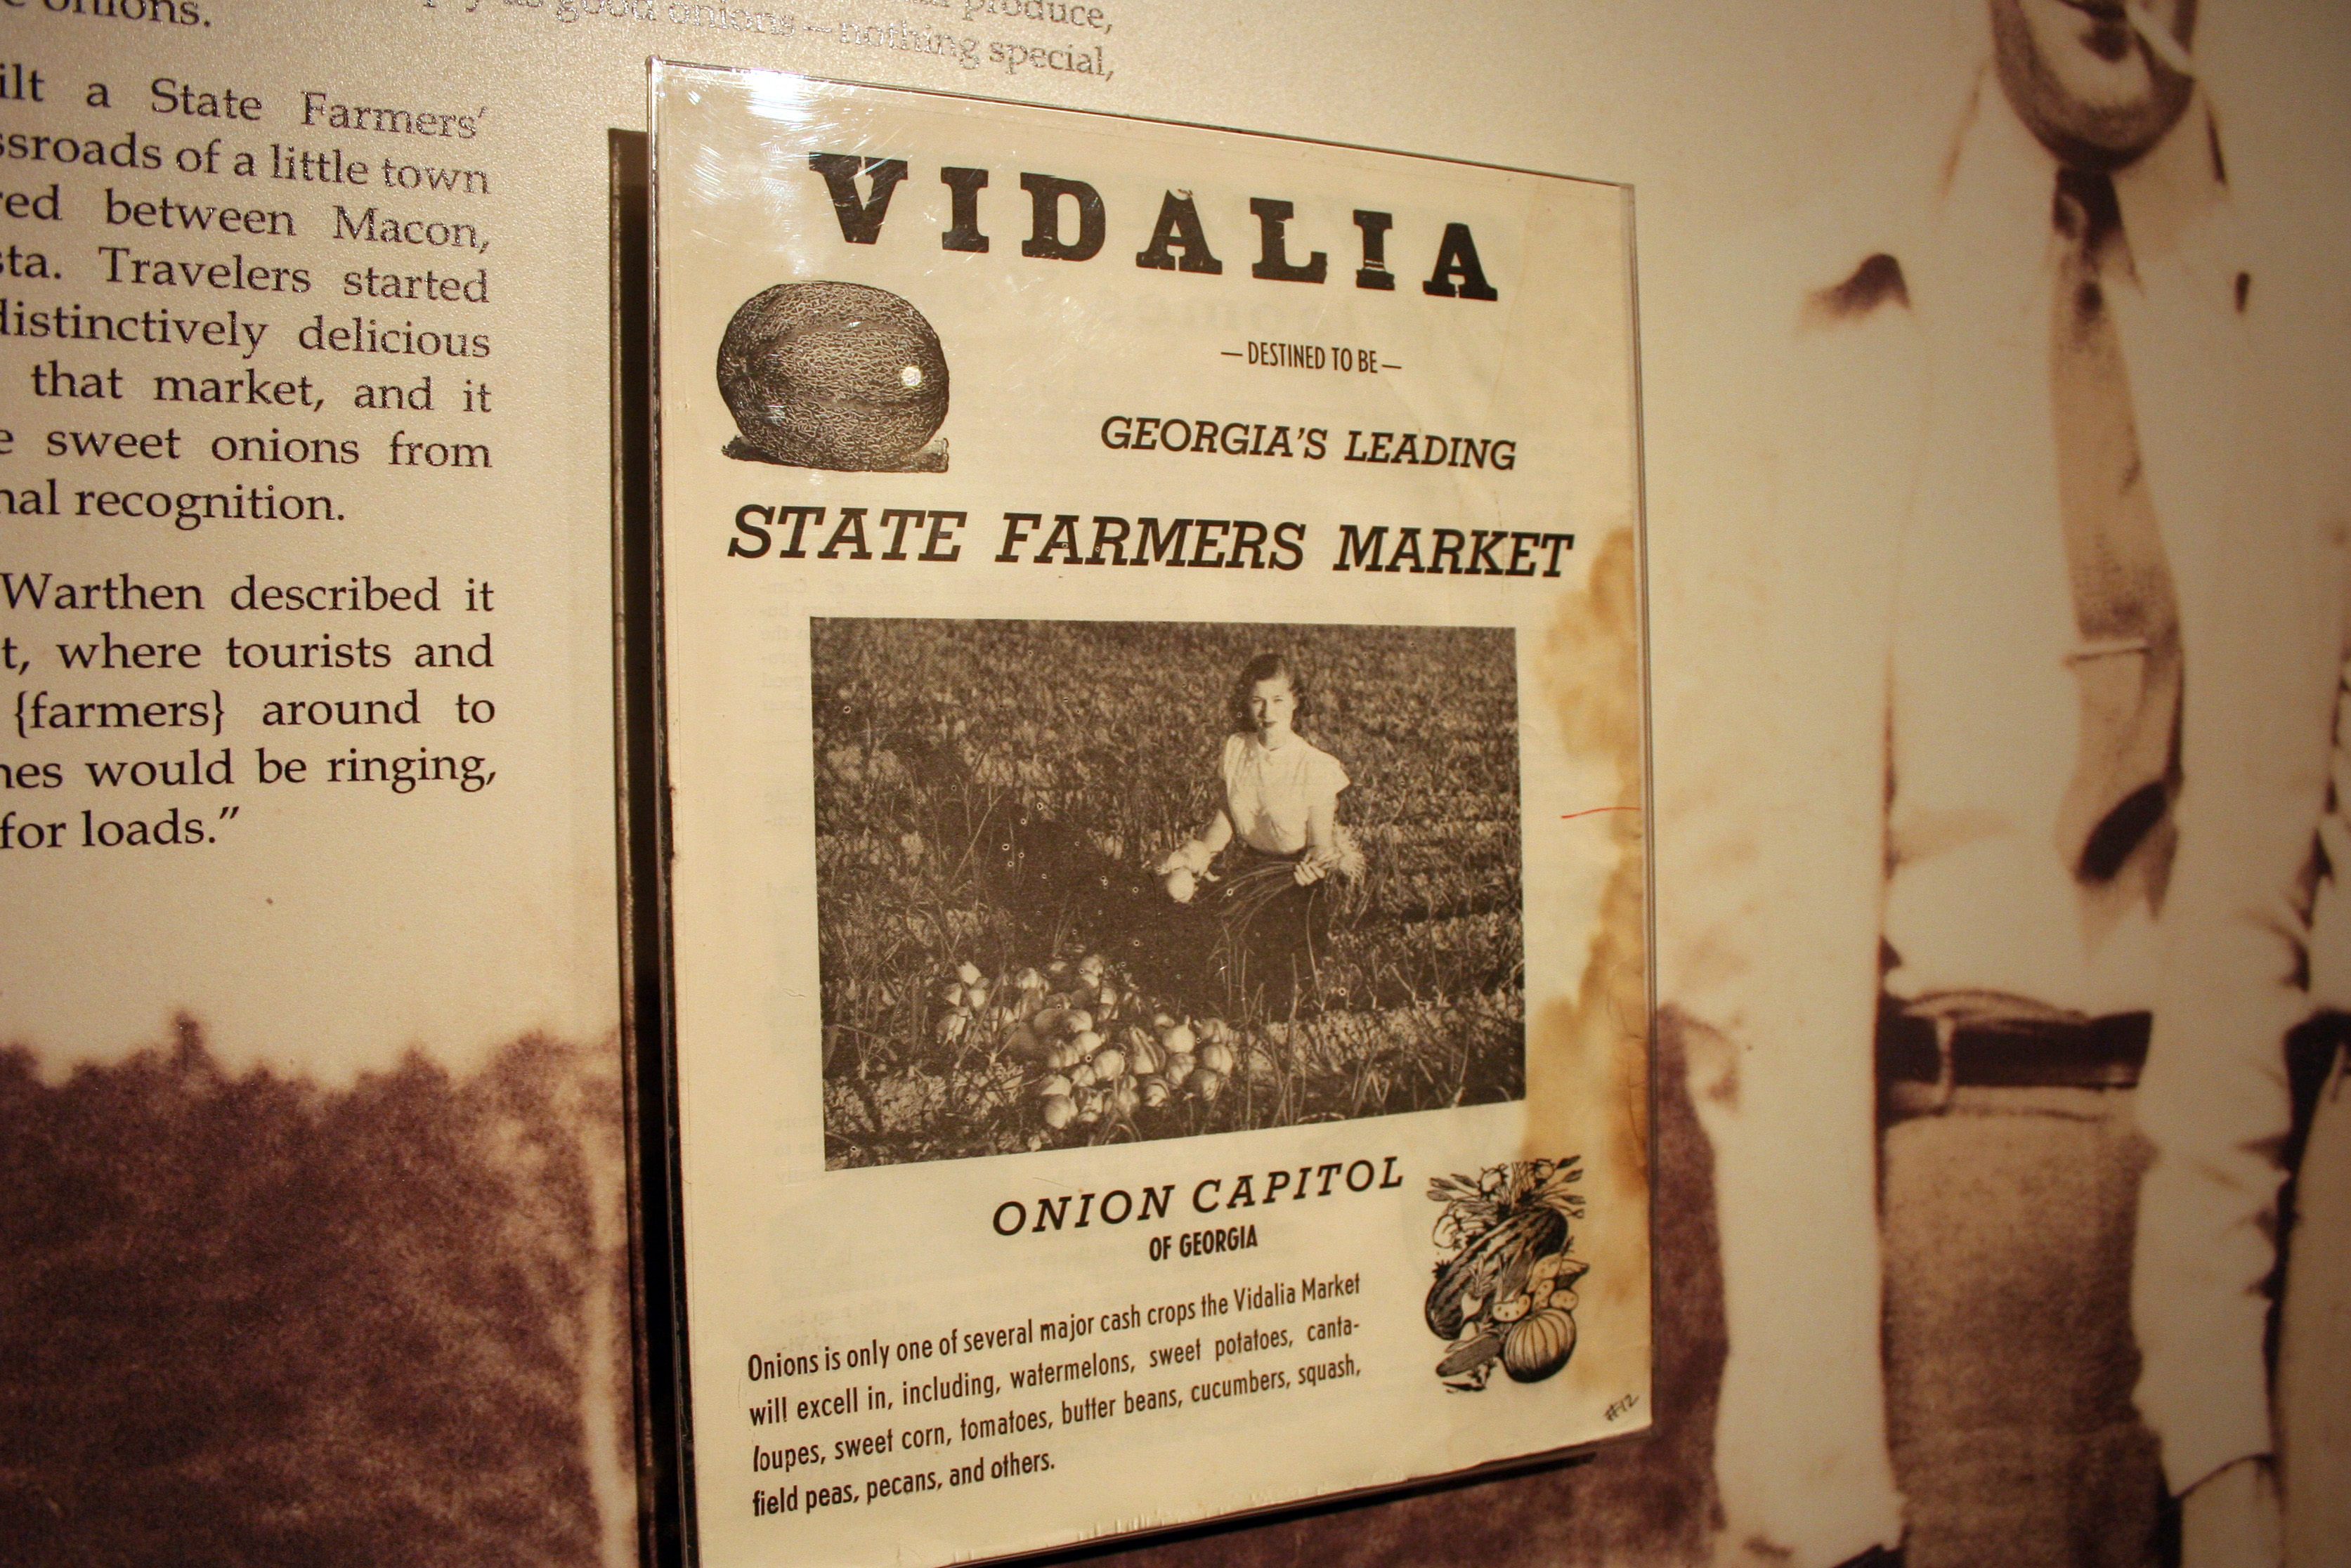 The Vidalia onion was popularized by the town's farmers’ market, built by the State of Georgia in the 1940s.